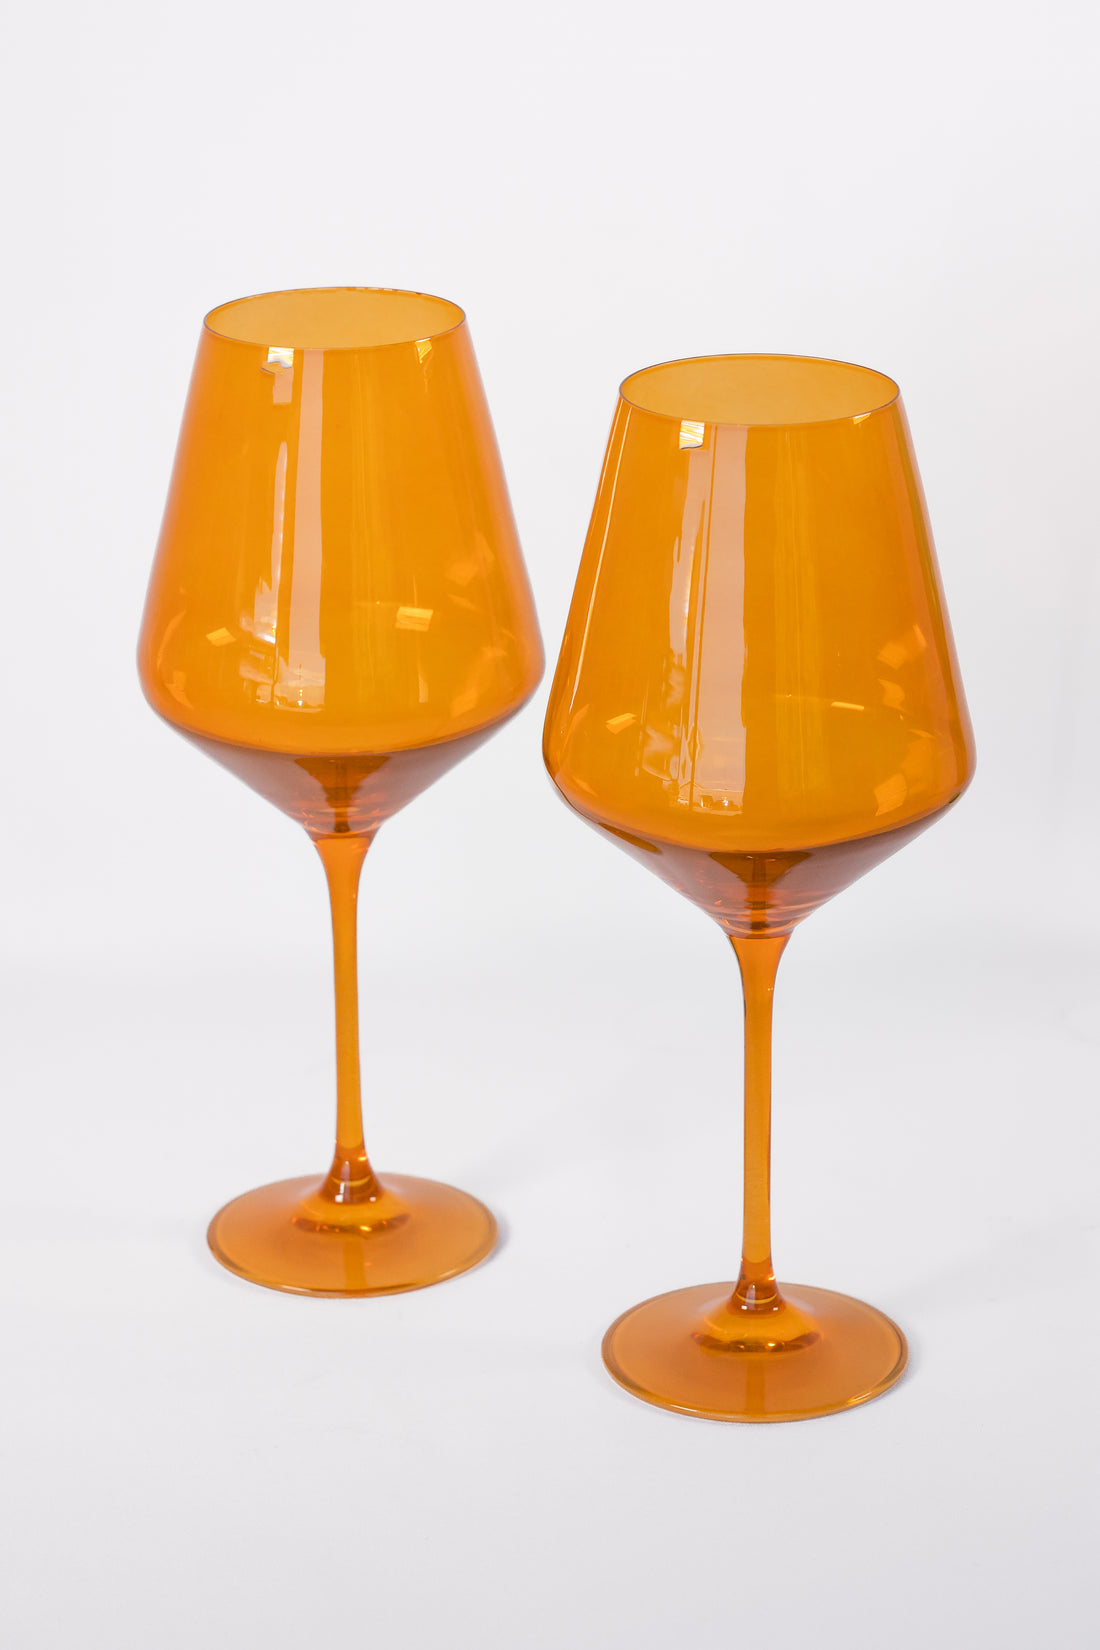 terrain Colorful Two Tone Wine Glasses, Set of 2 - ShopStyle